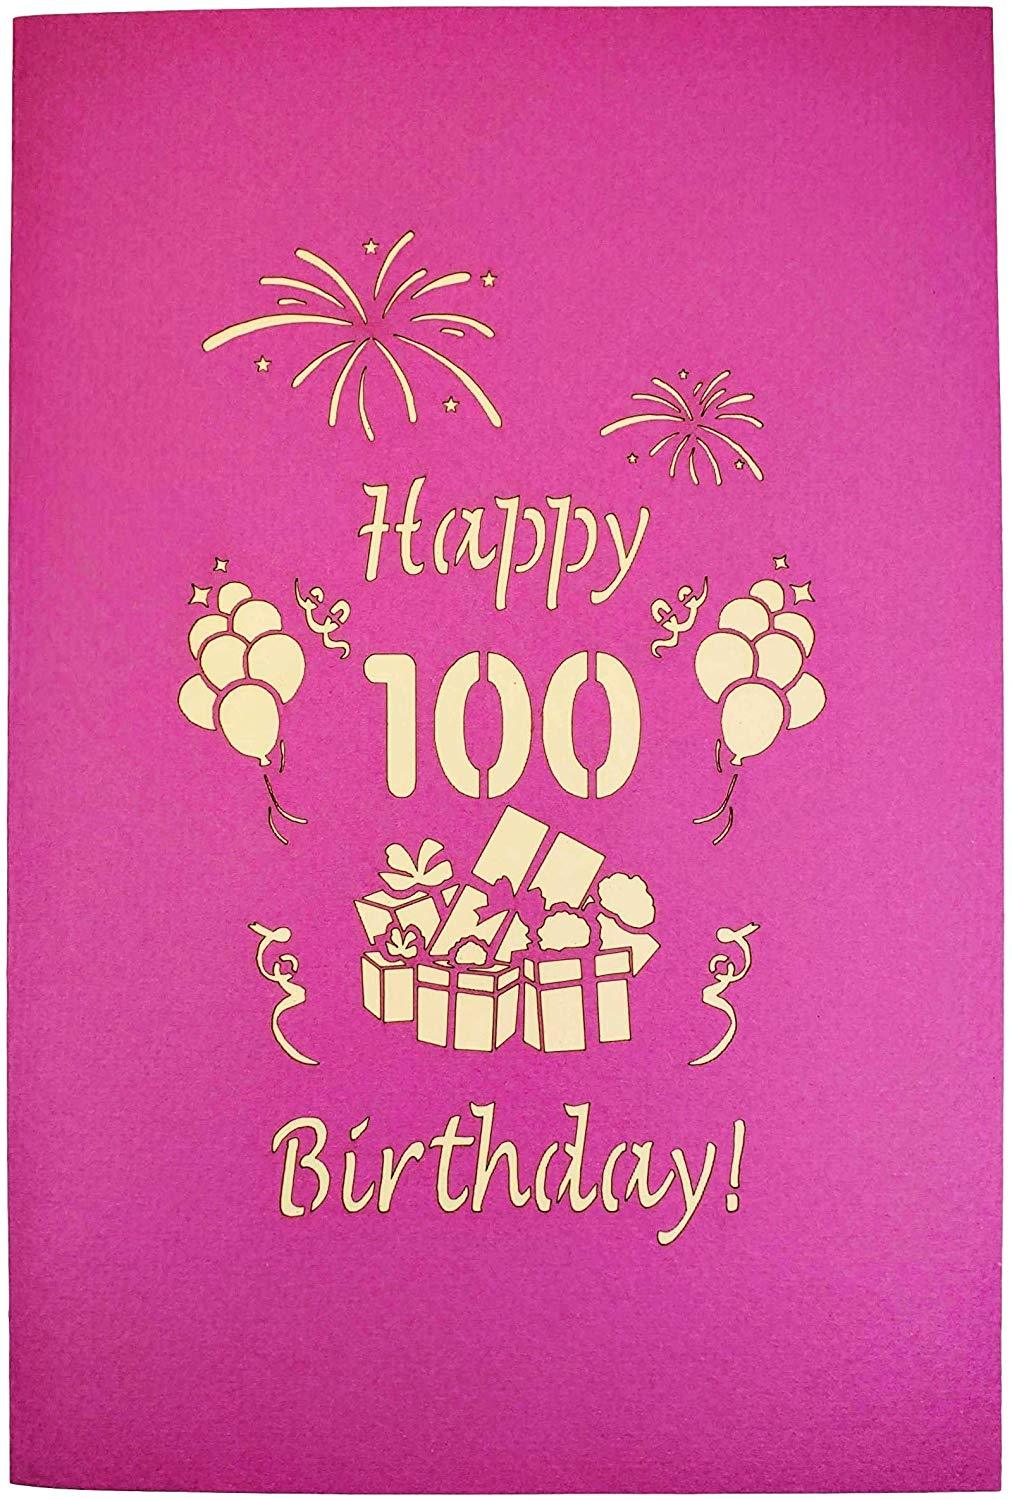 Happy 100th Birthday With Lots of Presents 3D Pop Up Greeting Card - Age - best deal - Birthday - Co - iGifts And Cards